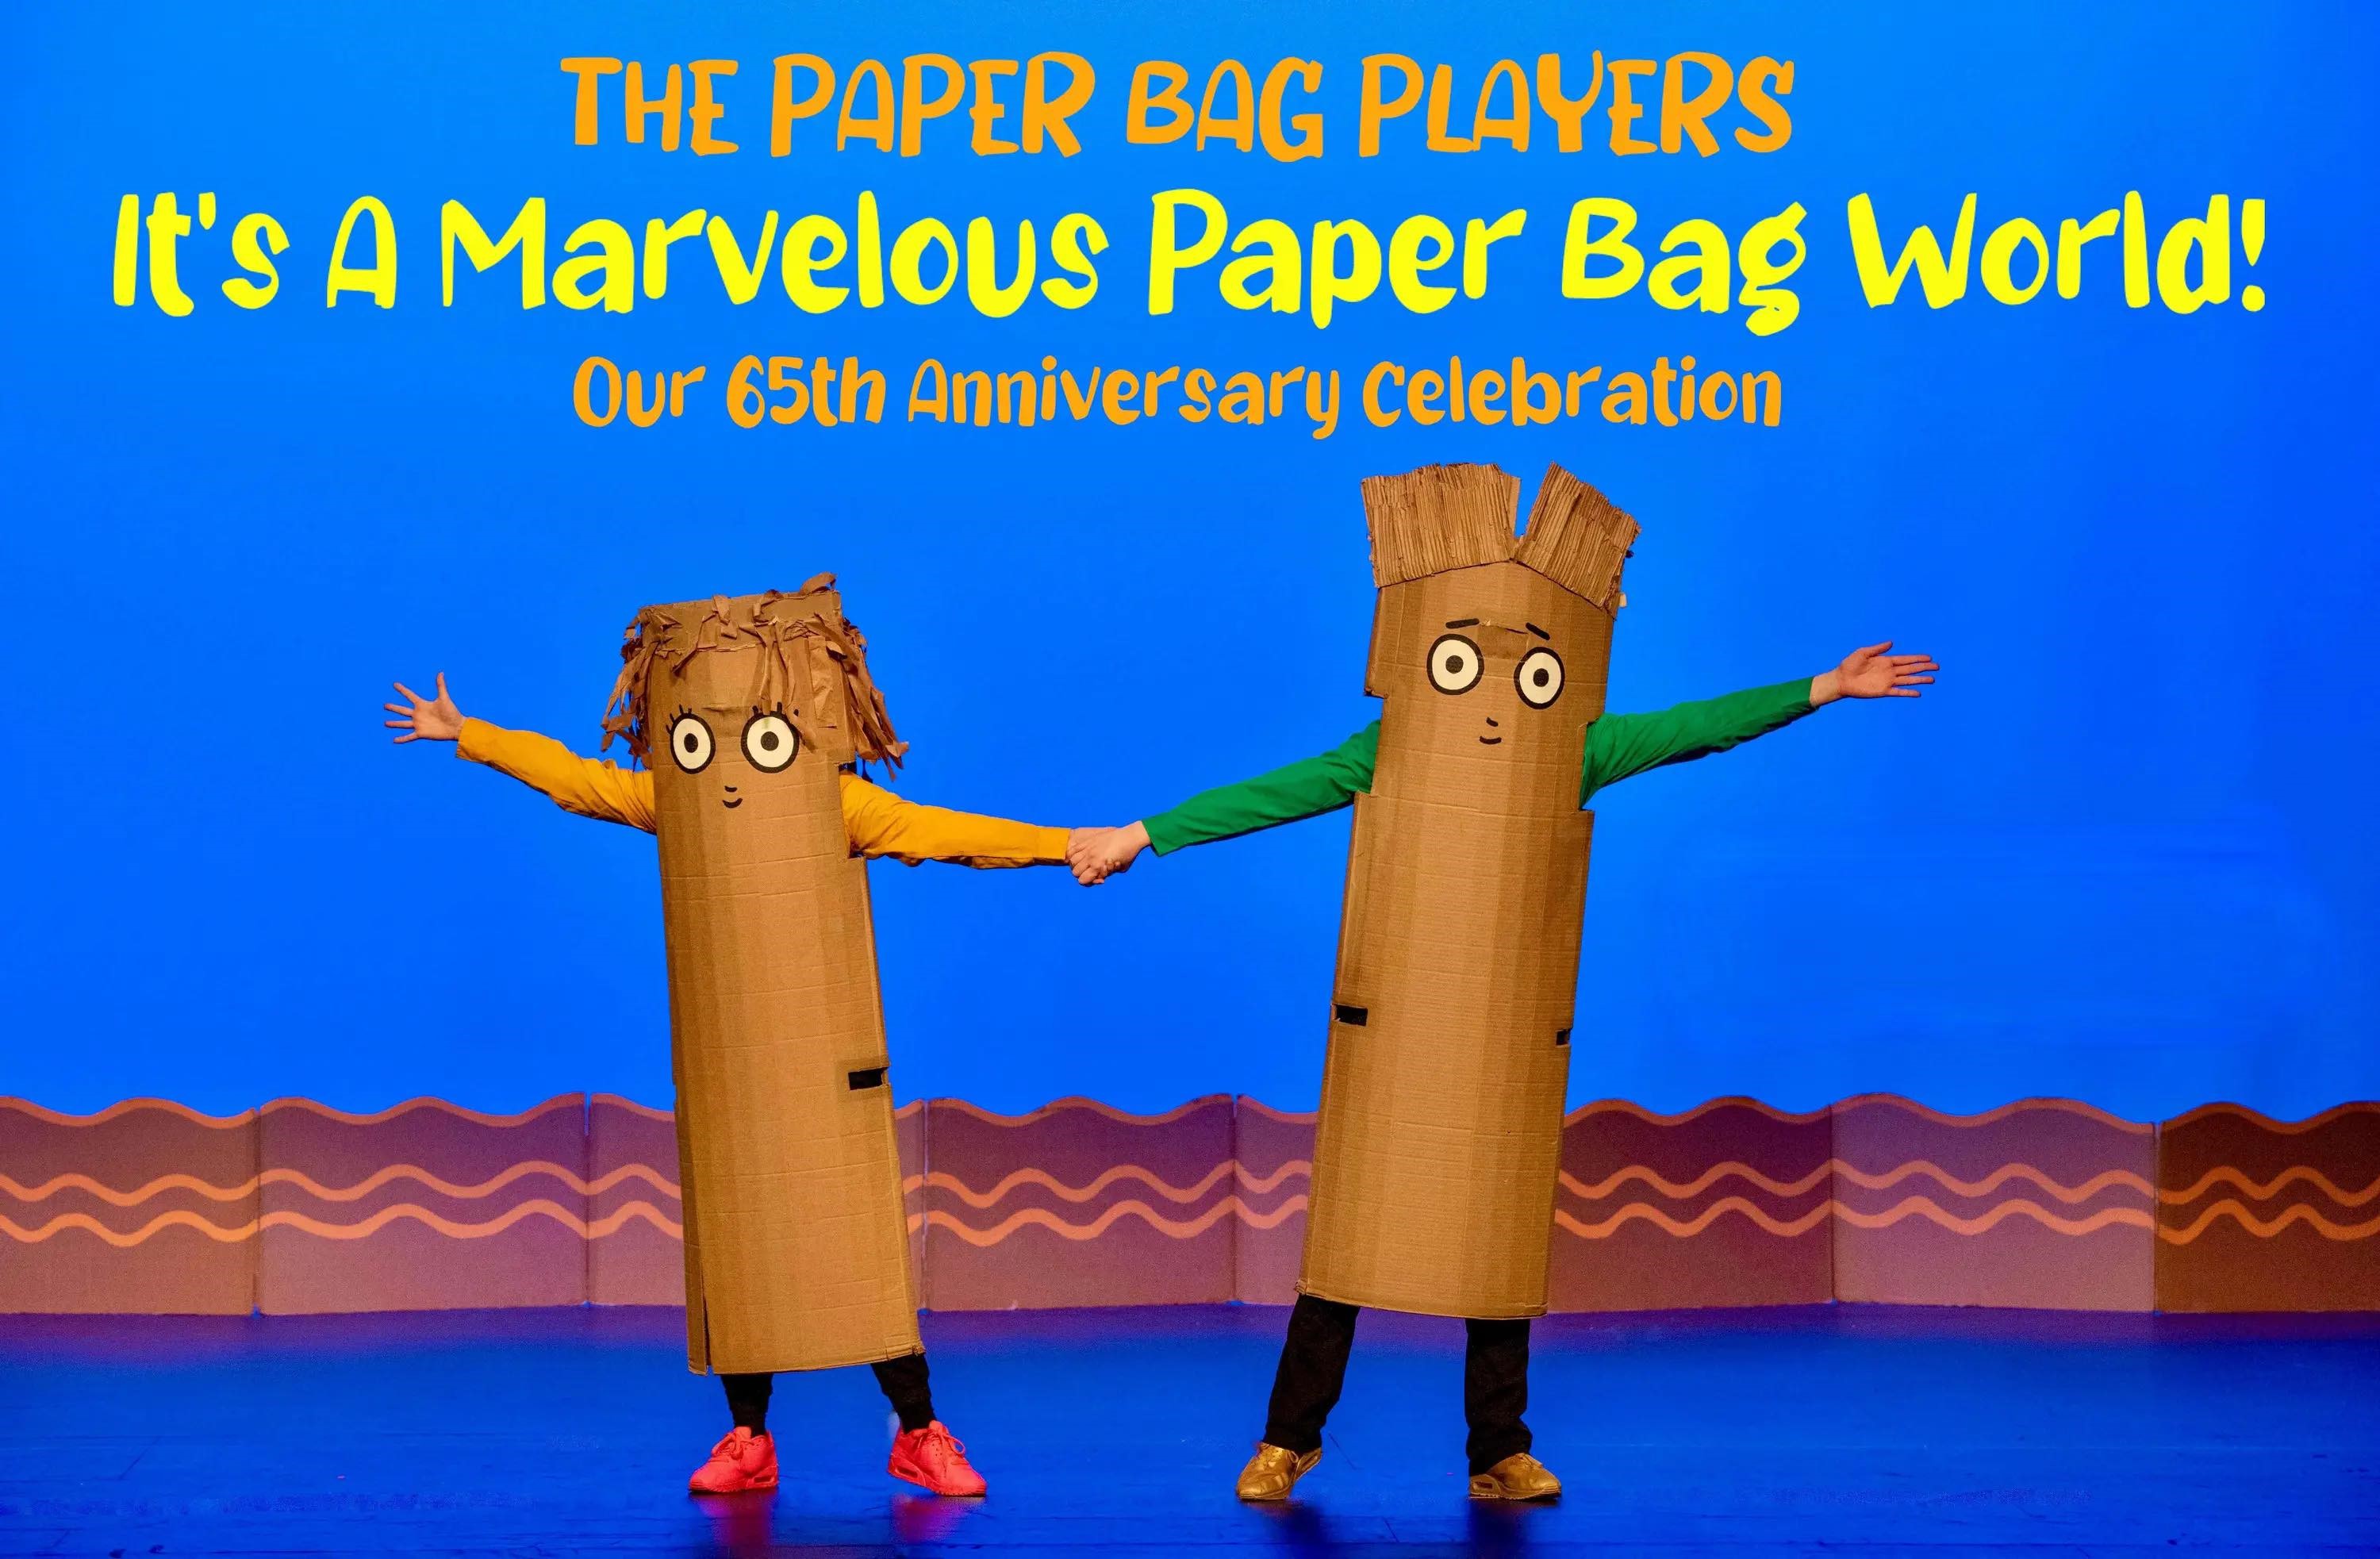 The Paper Bag Players: It's A Marvelous Paper Bag World!